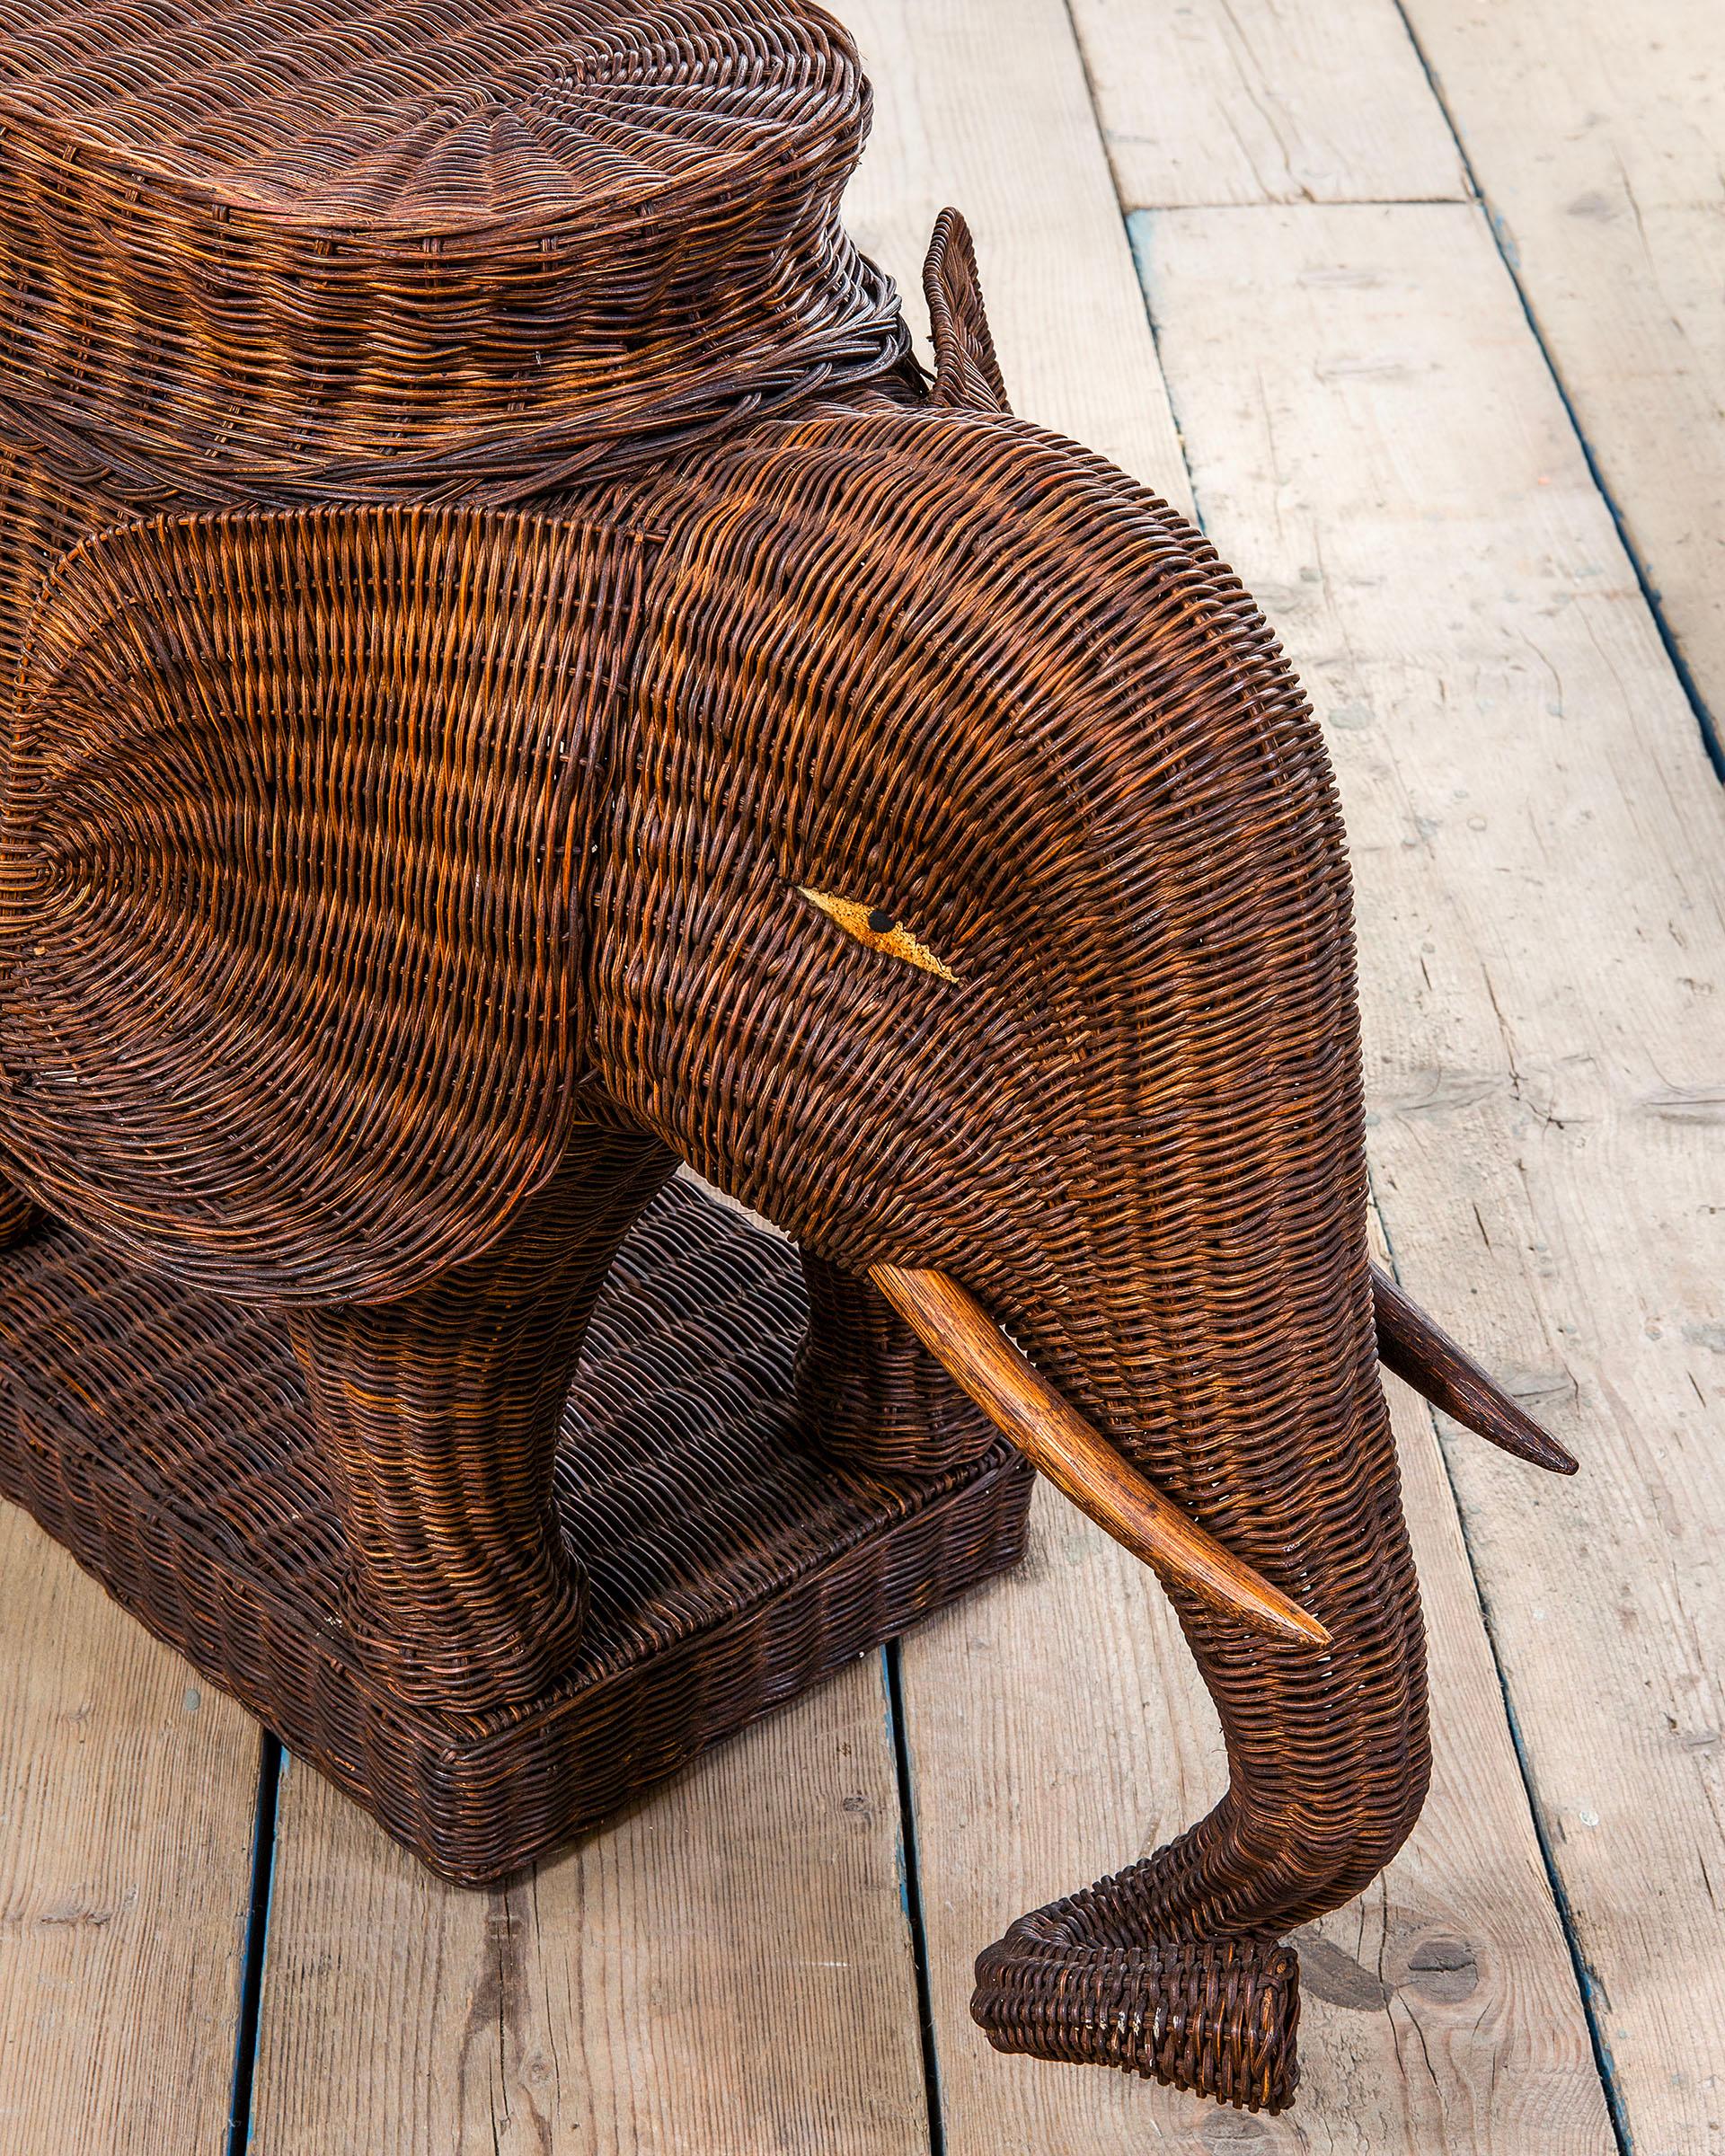 Mid-Century Modern 20th Century Vivai del Sud Elephant-Shaped Table in Rattan, 70s For Sale